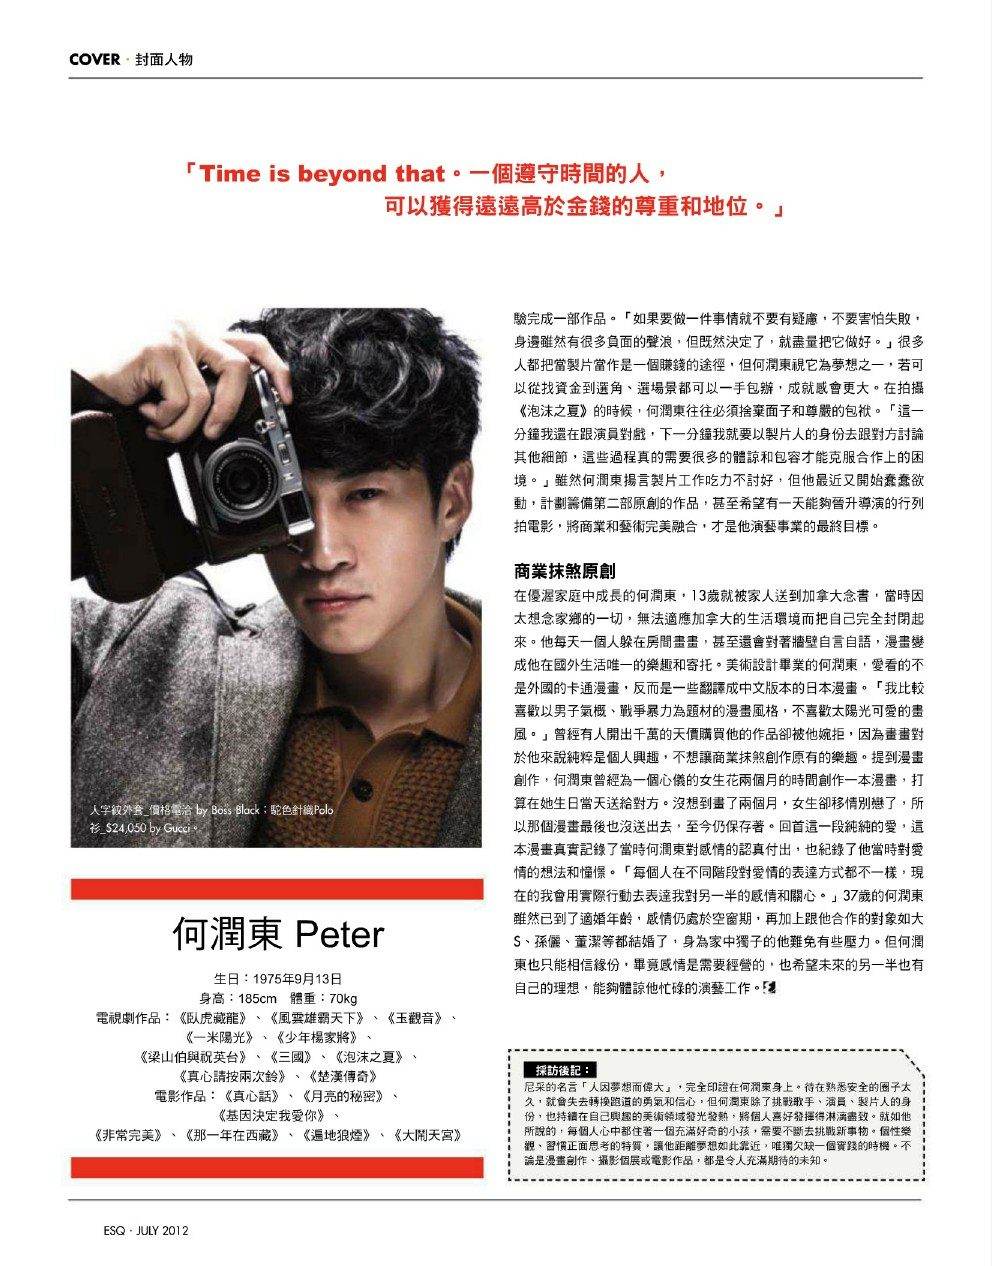 Esquire Taiwan issue 83 July 2012